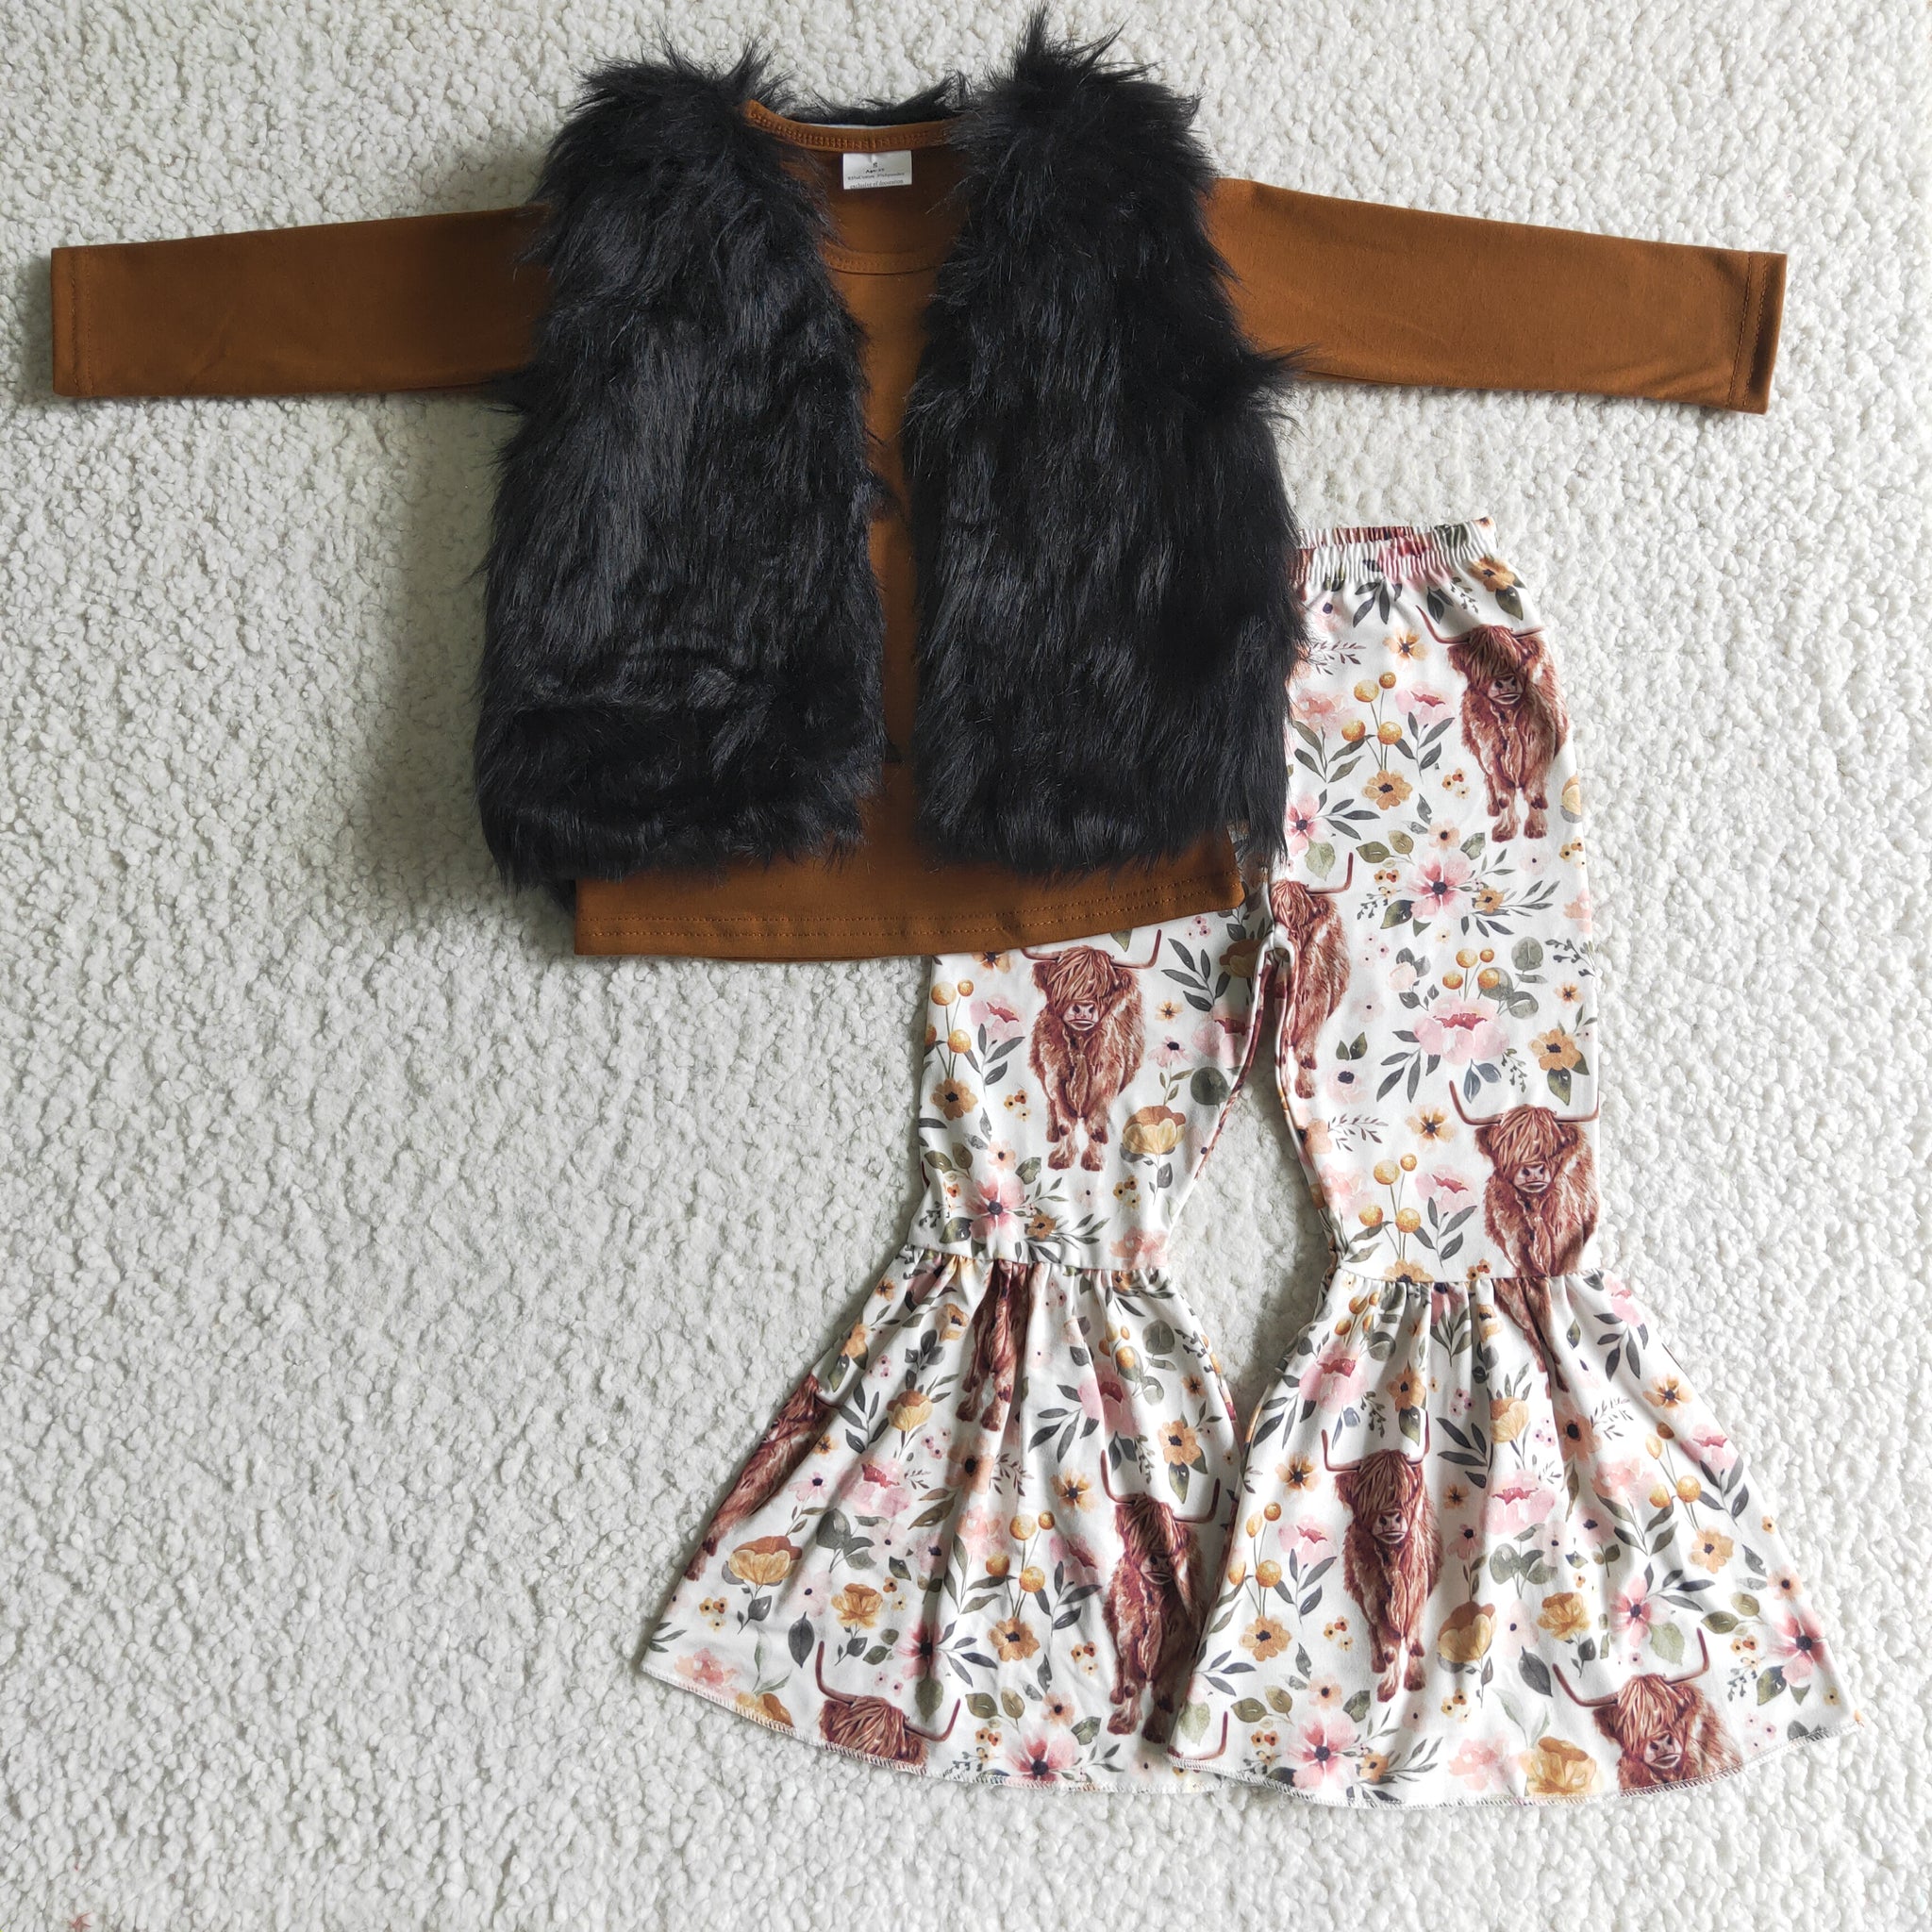 black fur vest brown cow baby girl clothes winter outfits 1